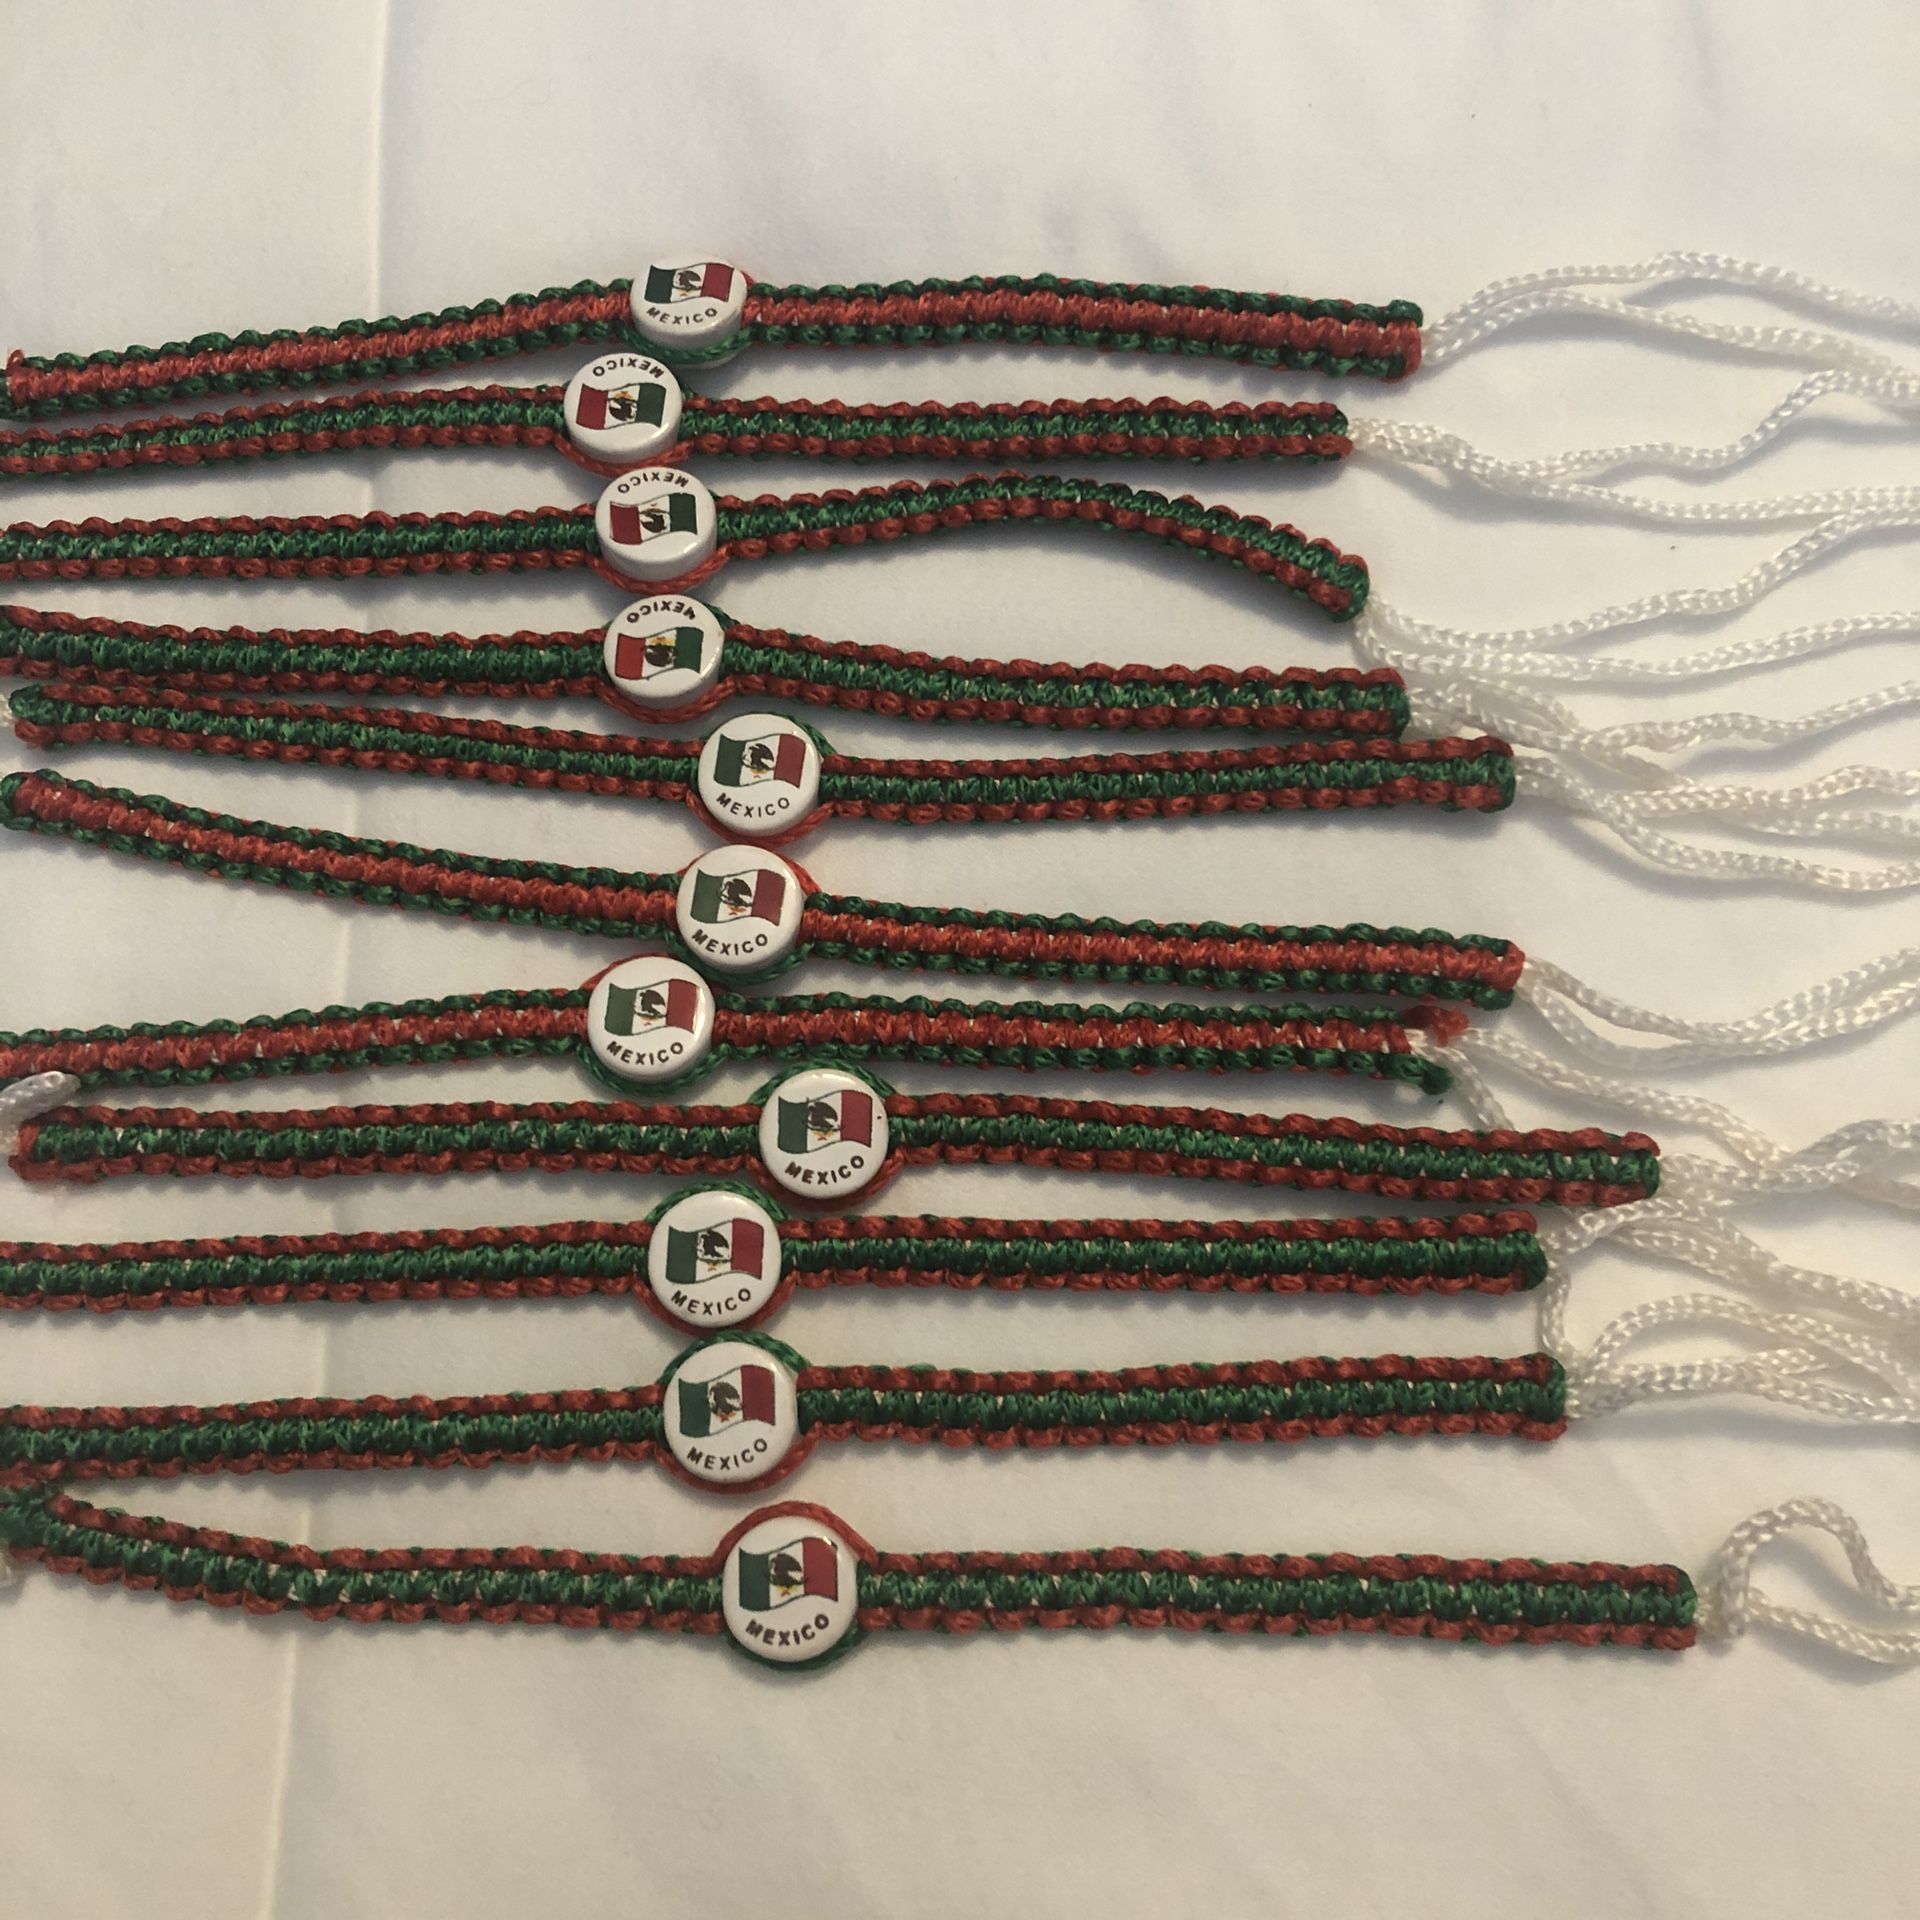 Mexican Flag Friendship Bracelet with Red White and Green Mexico Colors  Pack of 50